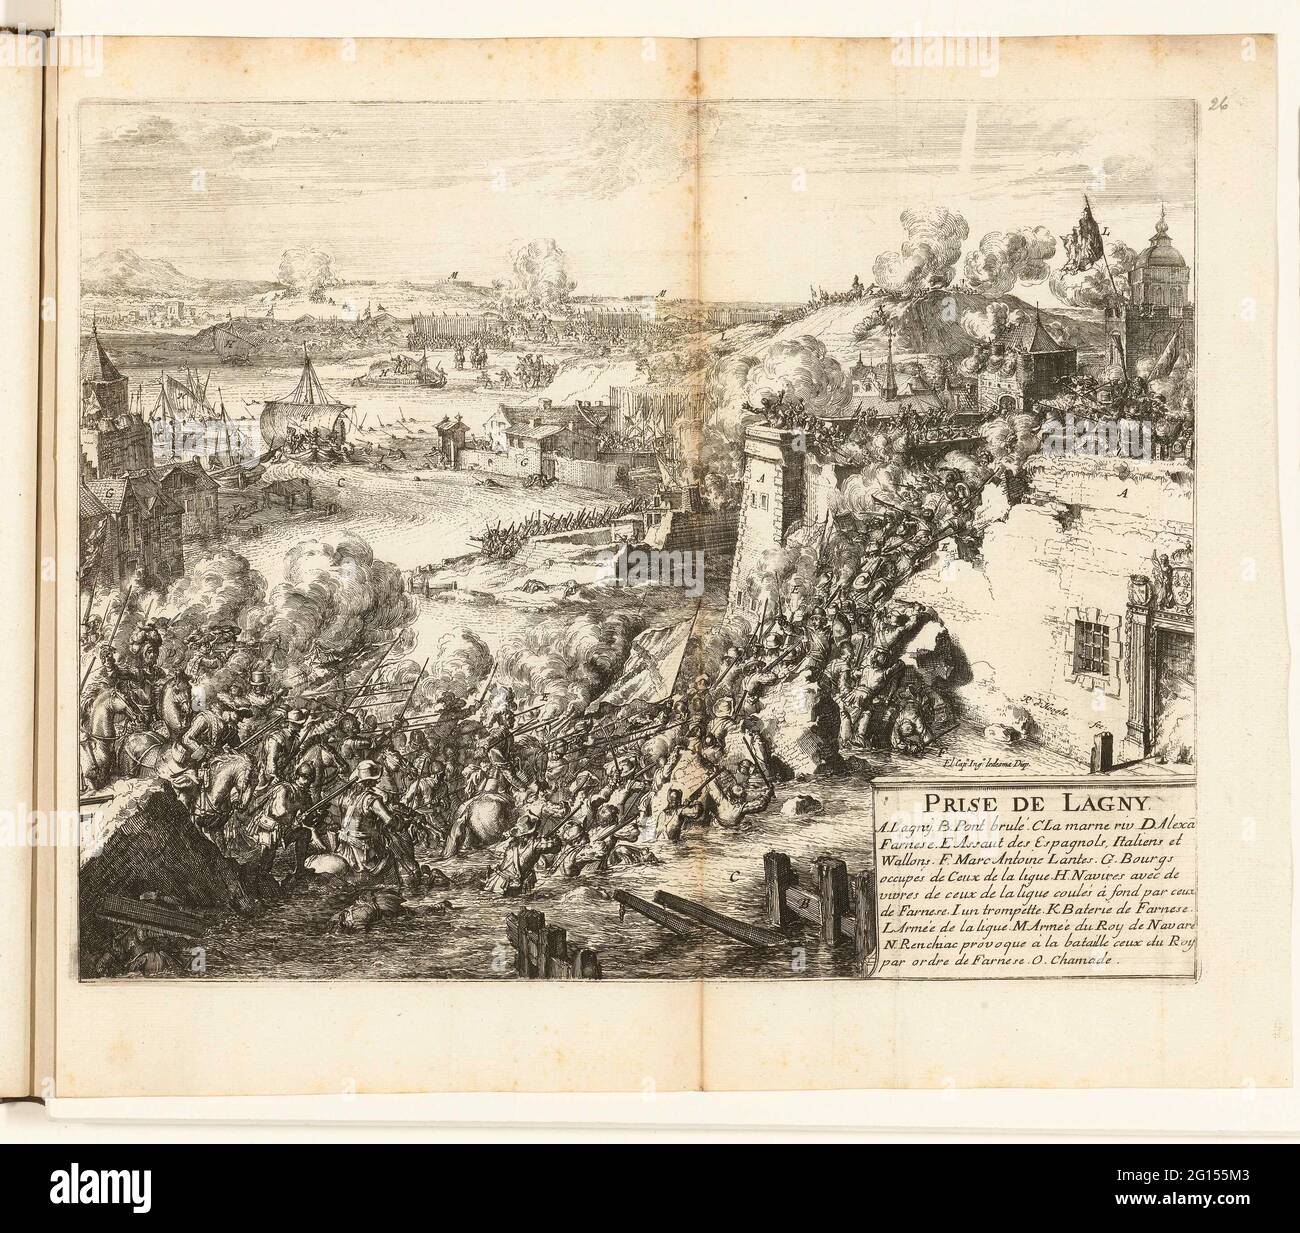 Intake of Lagny, 1589-1590; Prise de Lagny; Guerres de Flandres. Ingestion  of Lagny in France by the troops of the Duke of Parma, ca. 1589-1590. In  the foreground the soldiers pull through